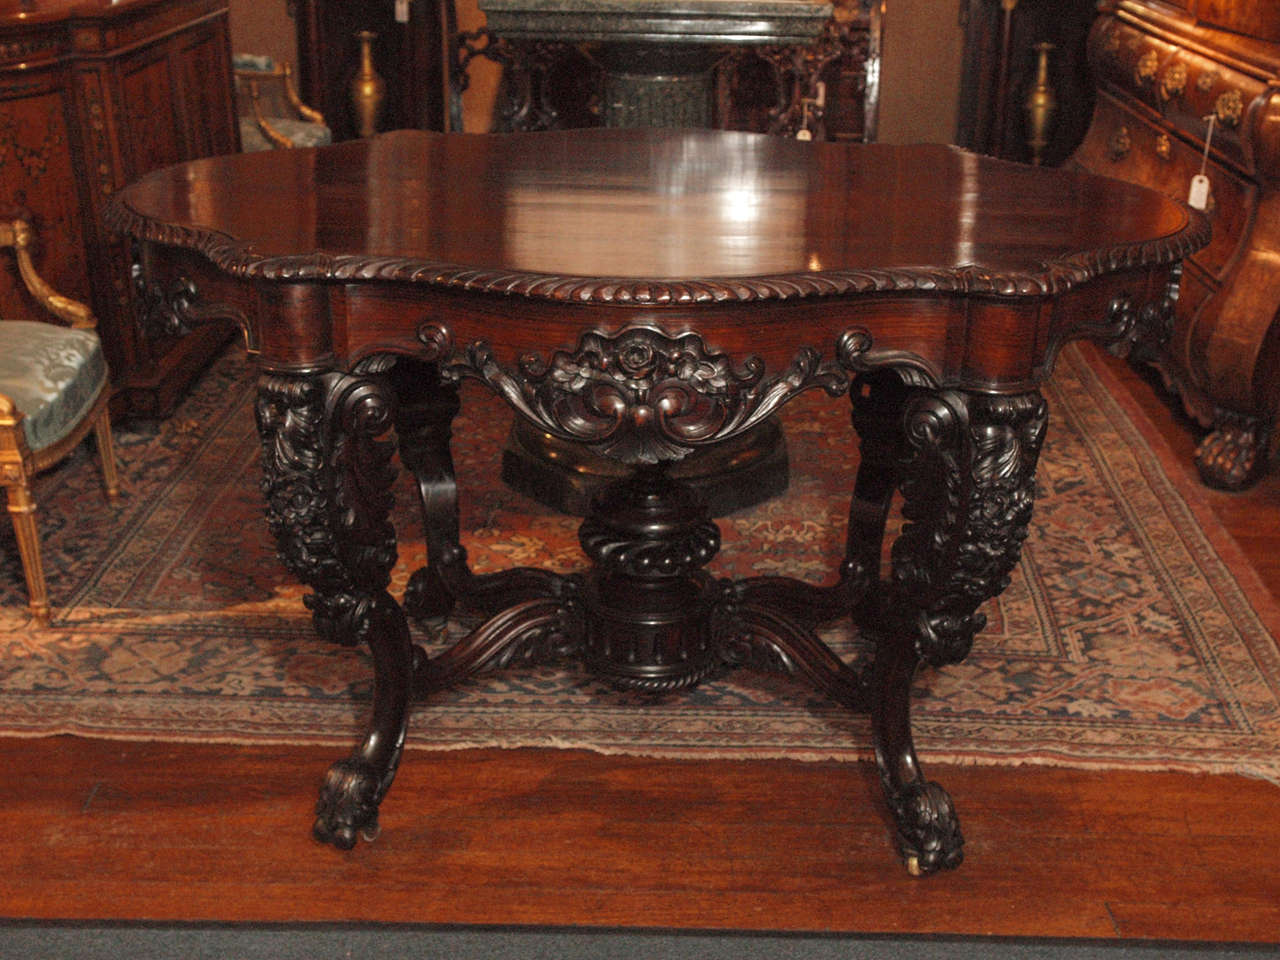 Magnificently carved. Made by Bertaud of Paris, cabinet maker to Napoleon III.